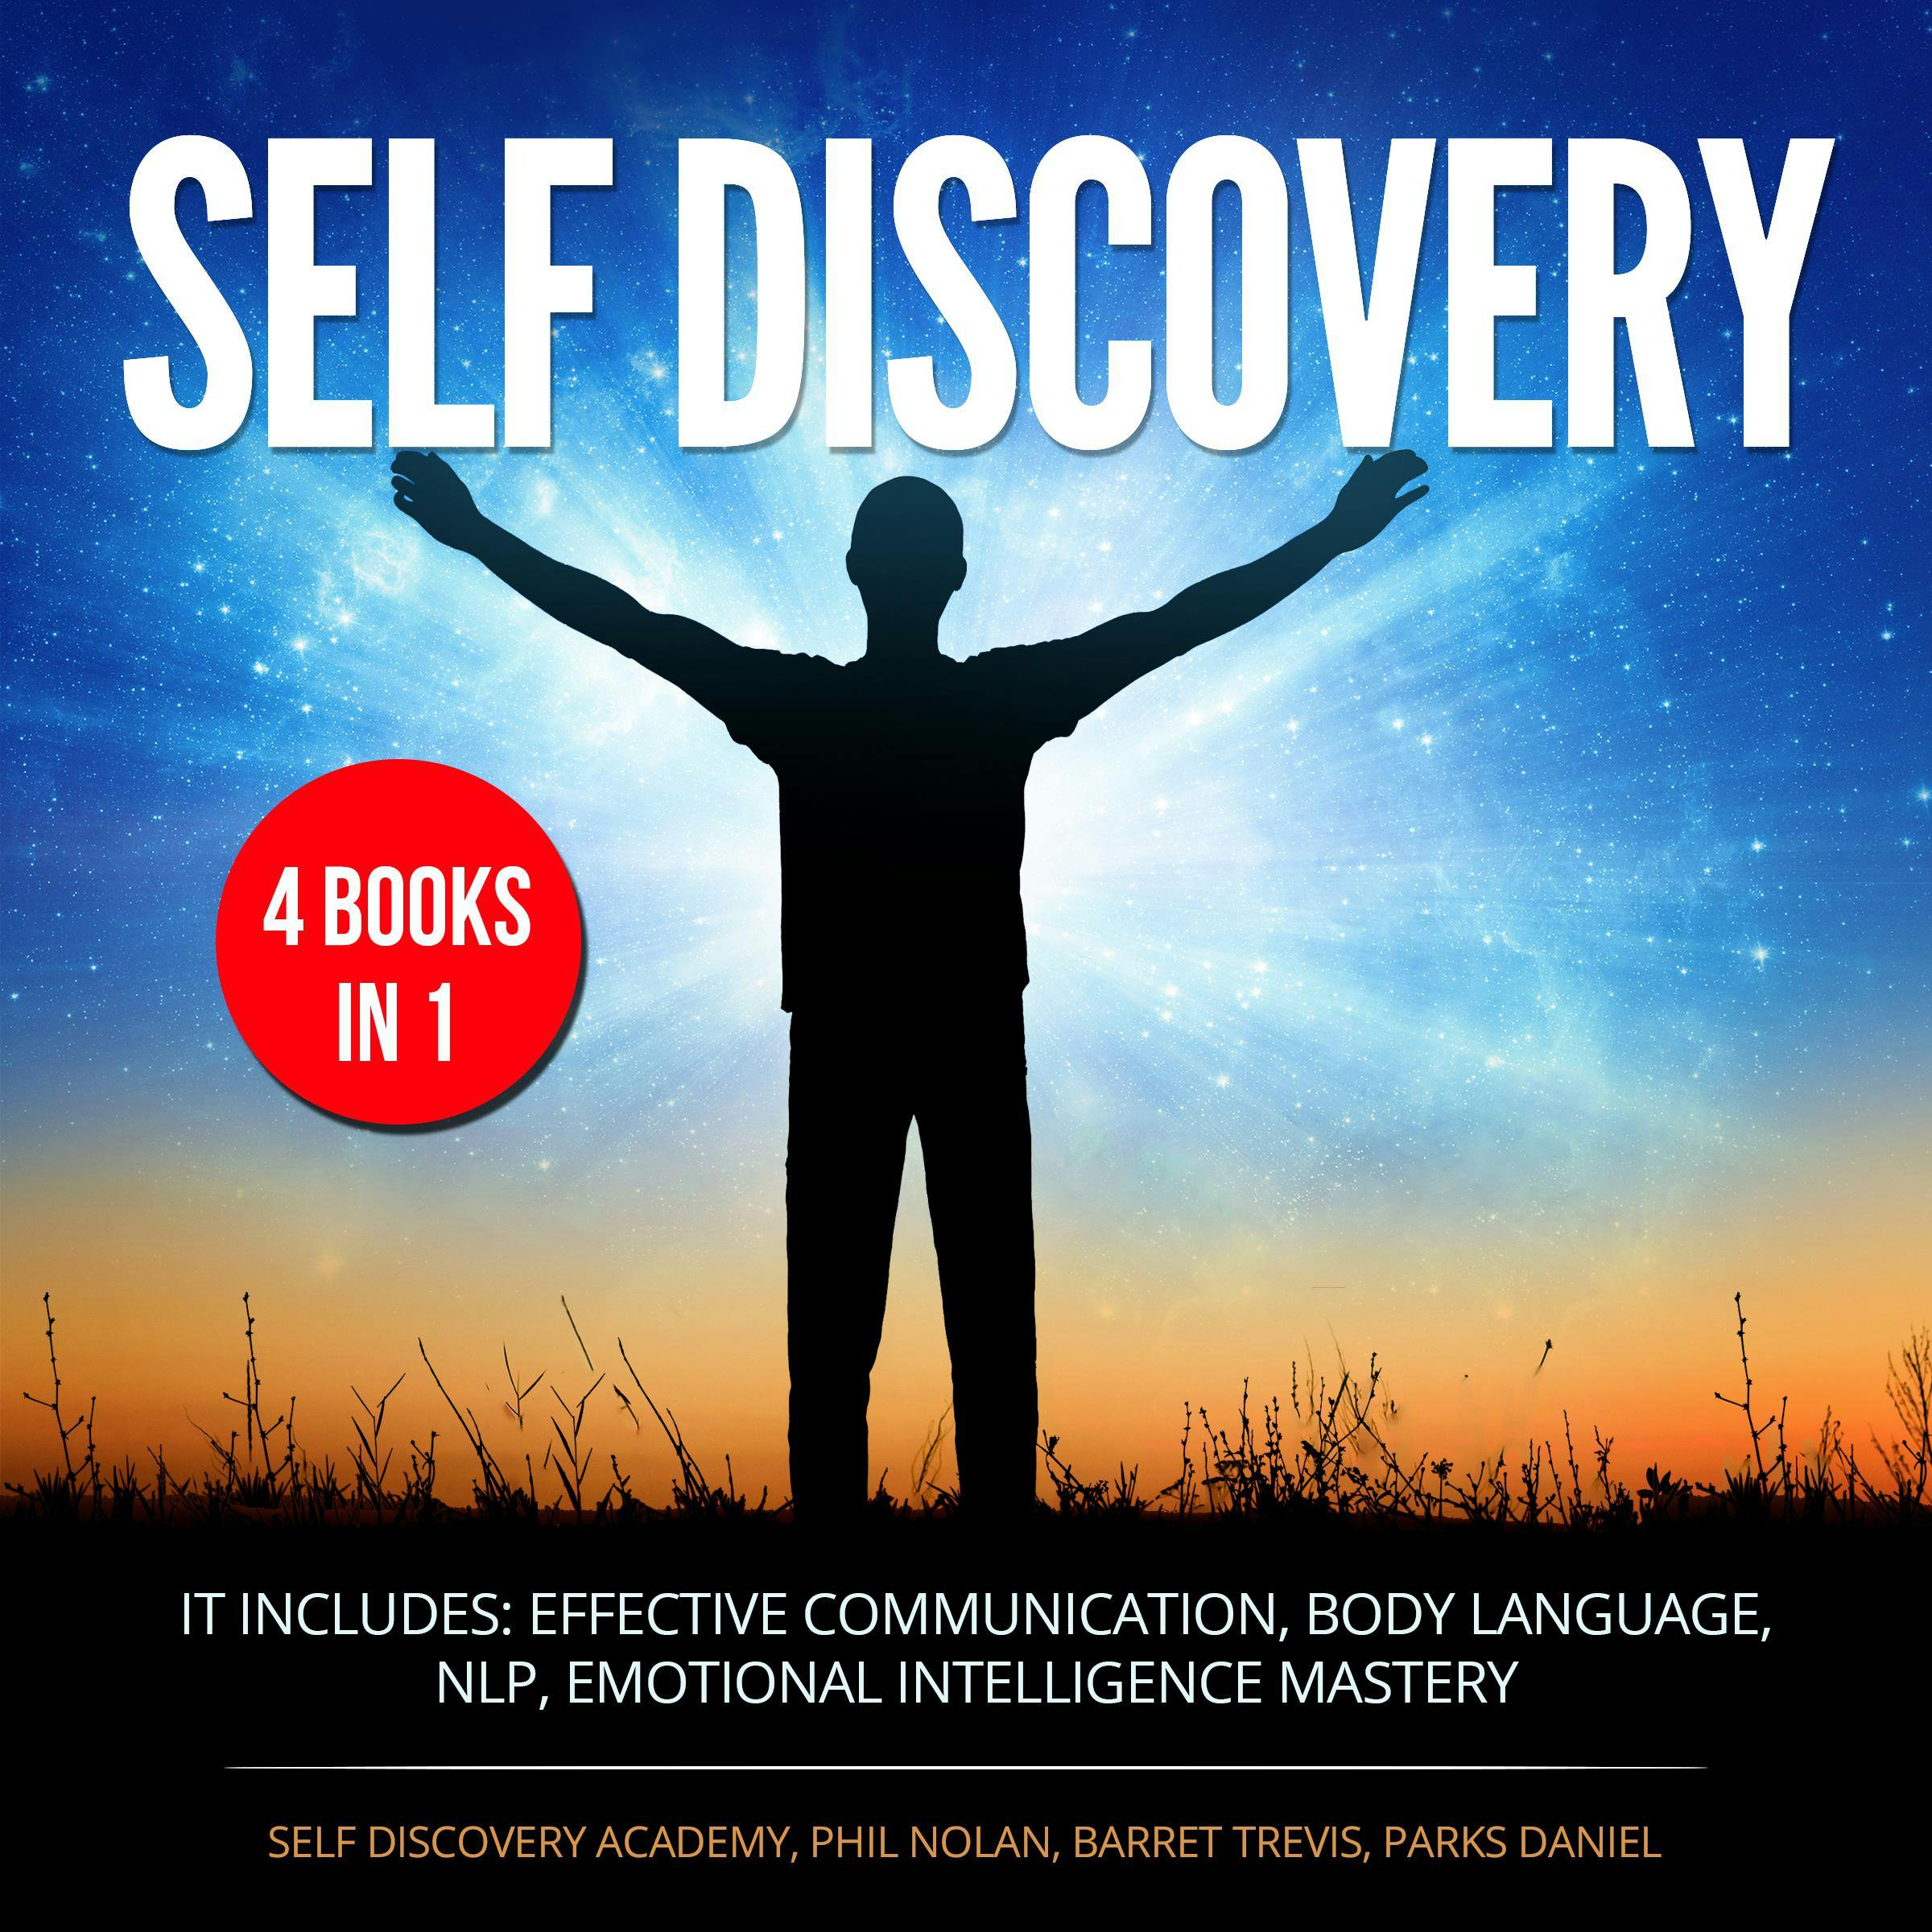 Self Discovery 4 Books in 1: It includes: Effective Communication, Body Language, NLP, Emotional Intelligence Mastery - undefined